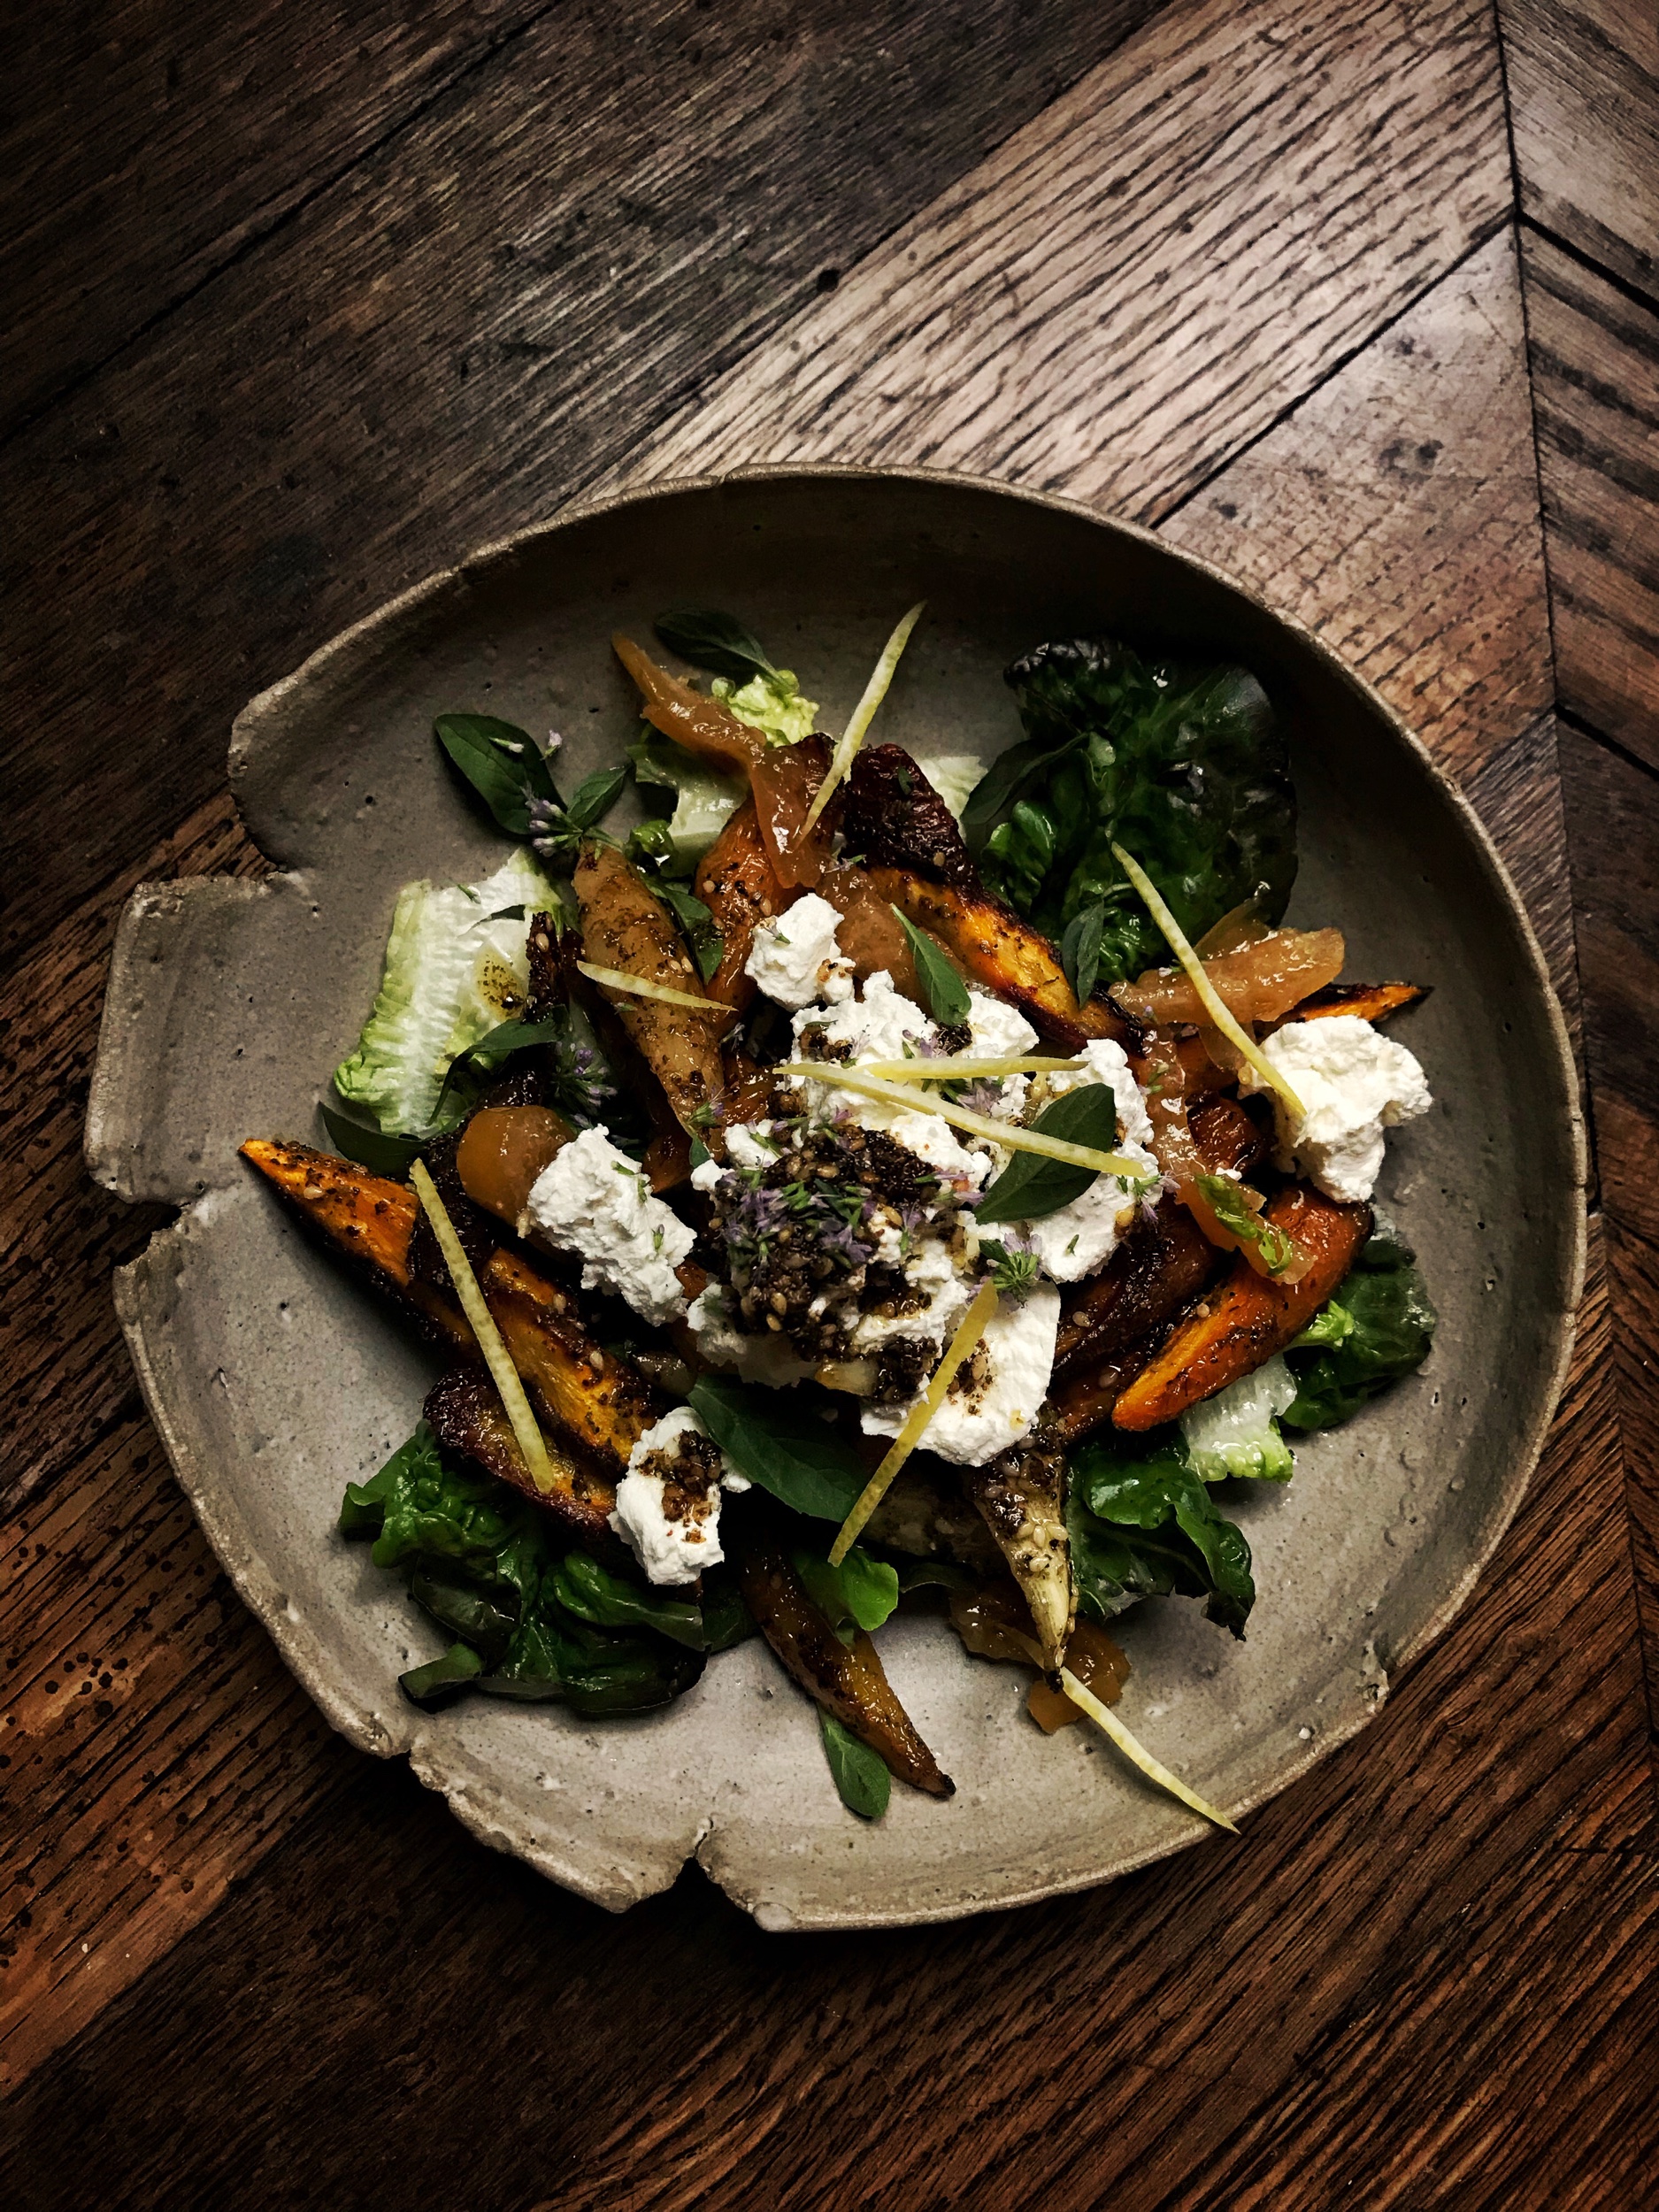 Roasted carrot salad with labneh